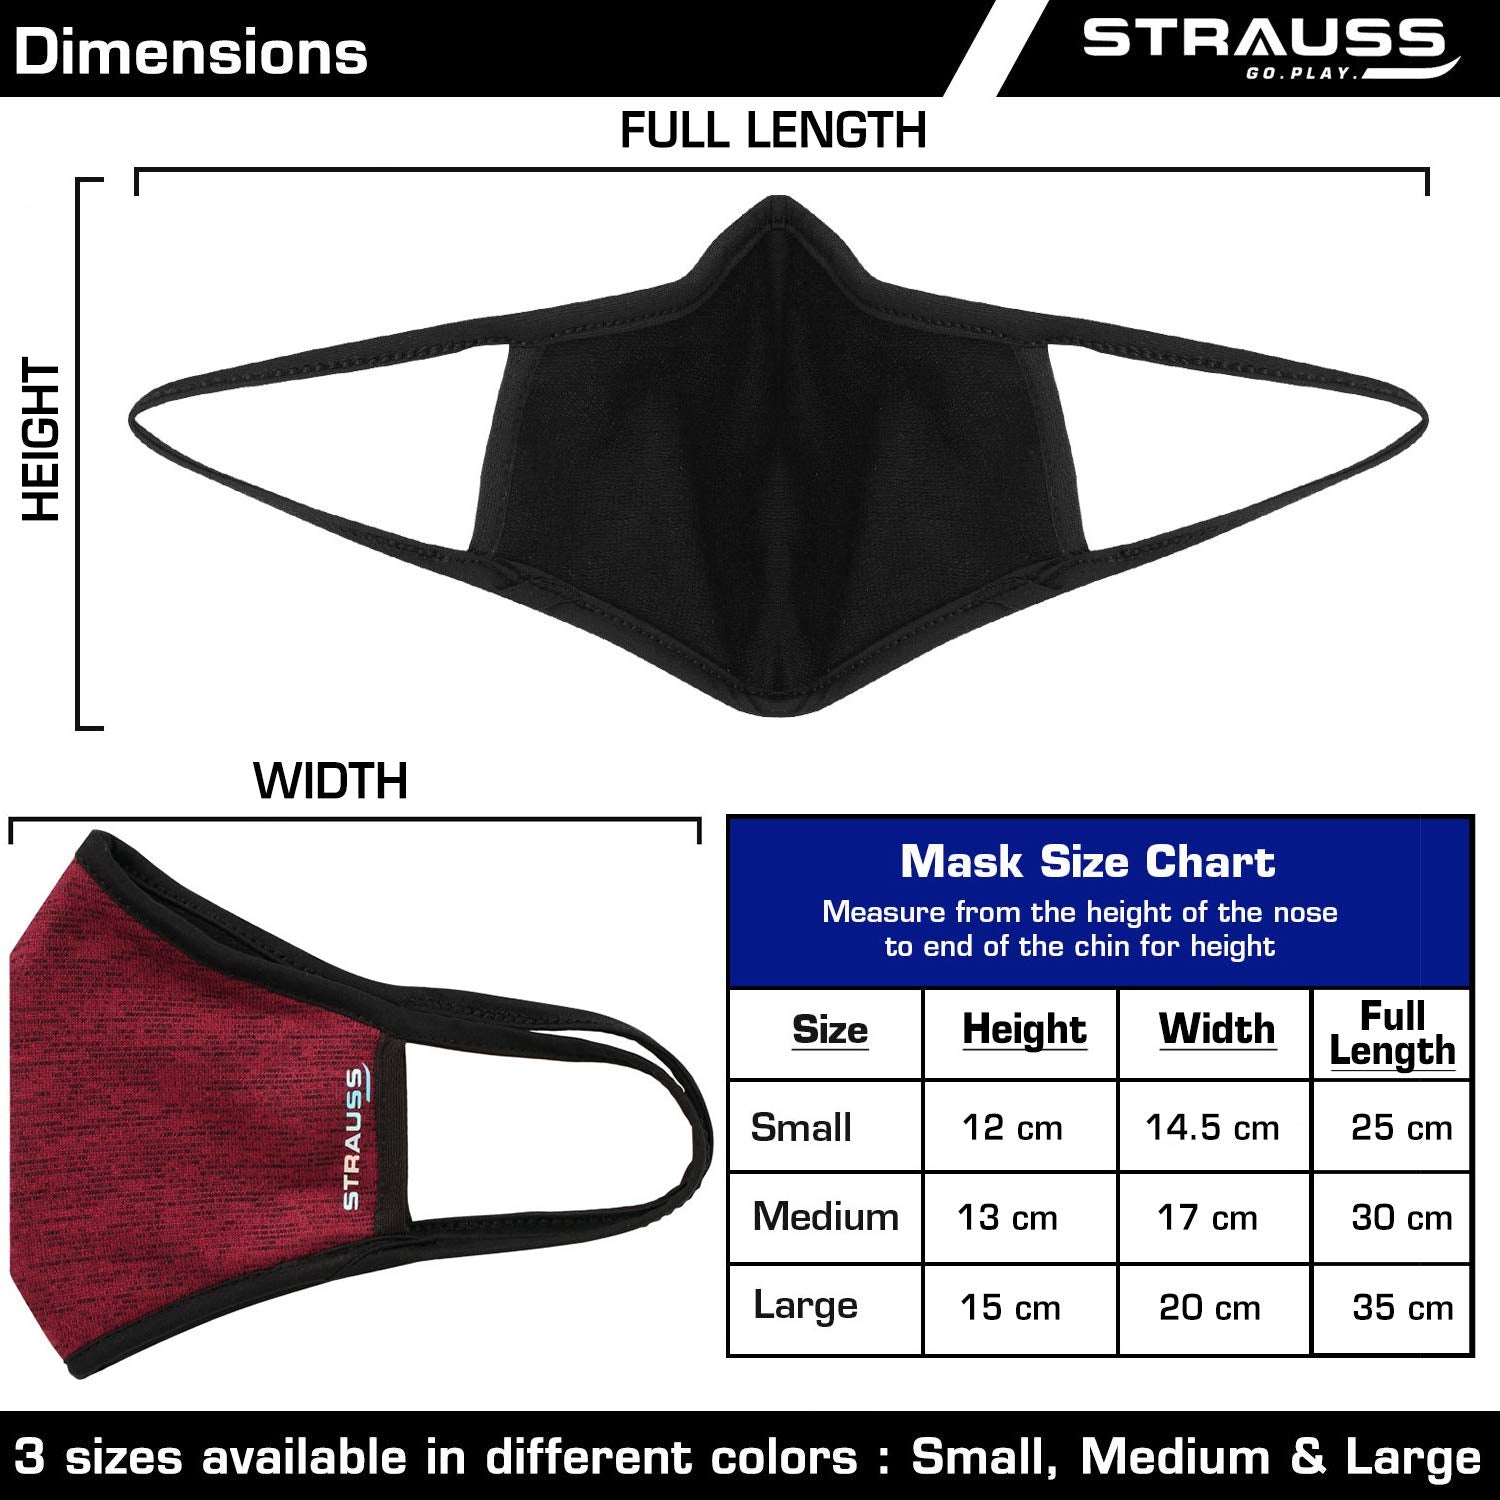 STRAUSS Unisex Anti-Bacterial Protection Mask, Non Vent, Medium, (Red)